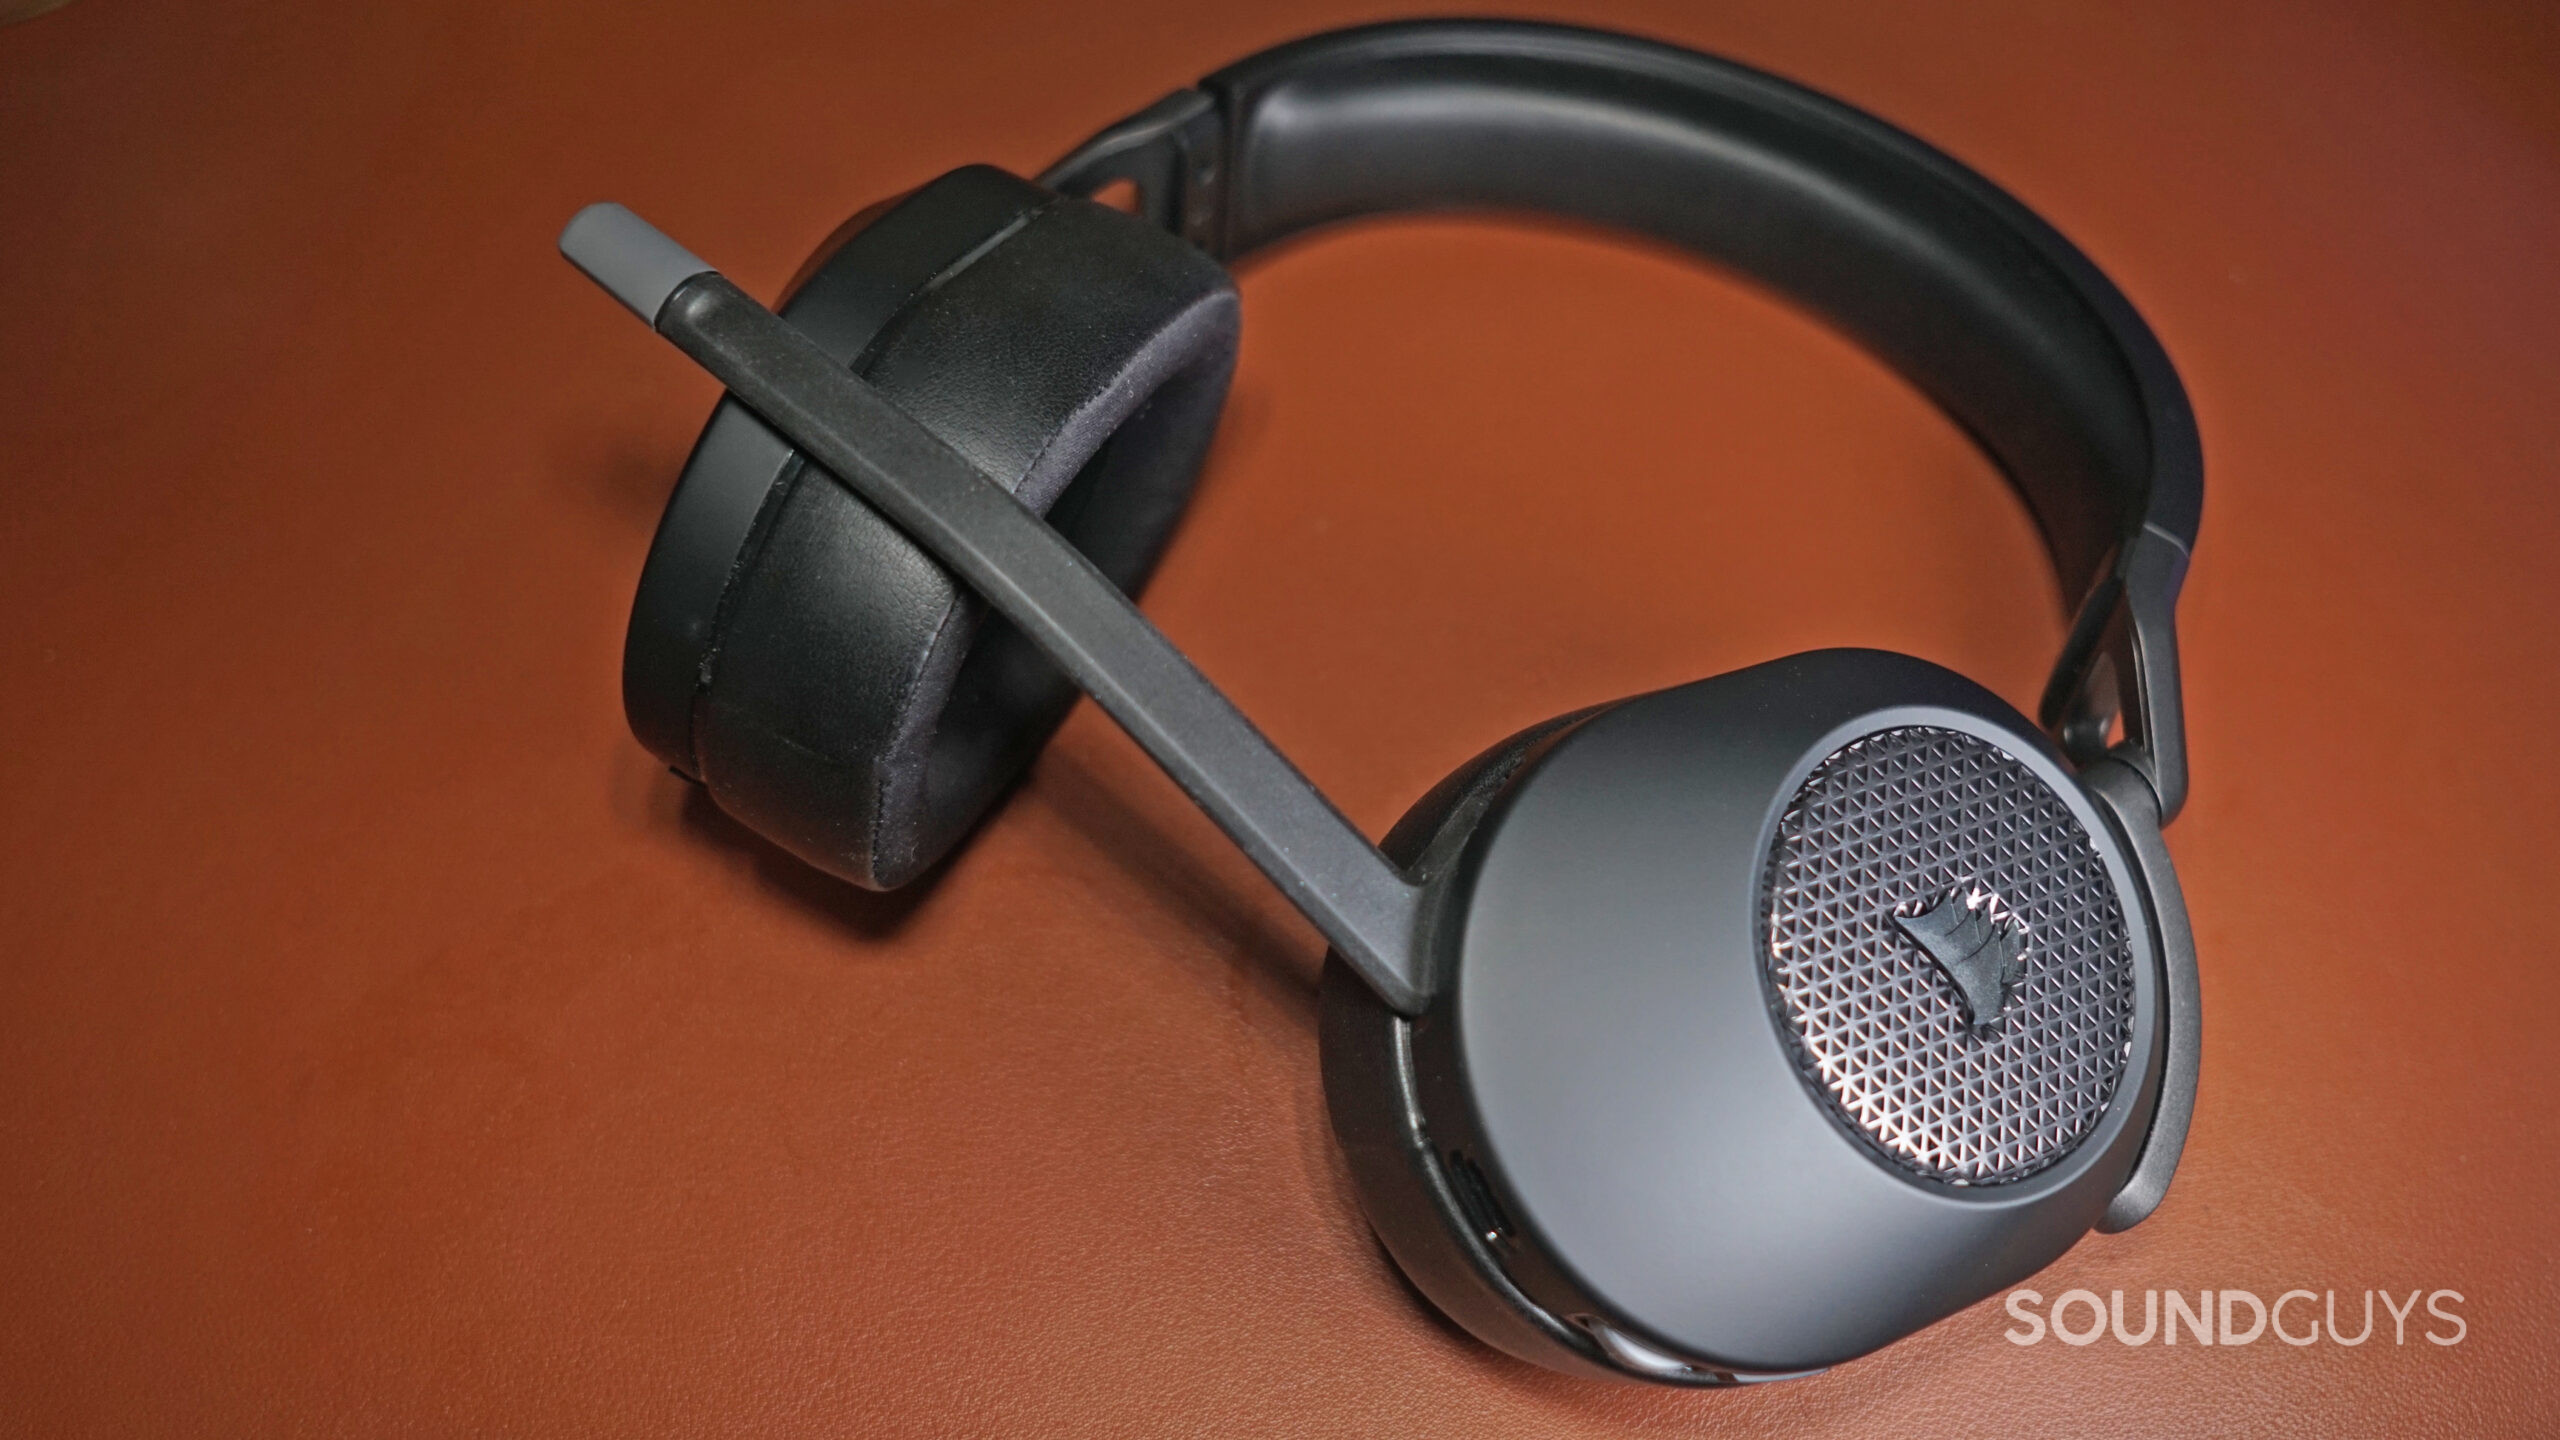 The Corsair HS65 Wireless lays on a leather surface